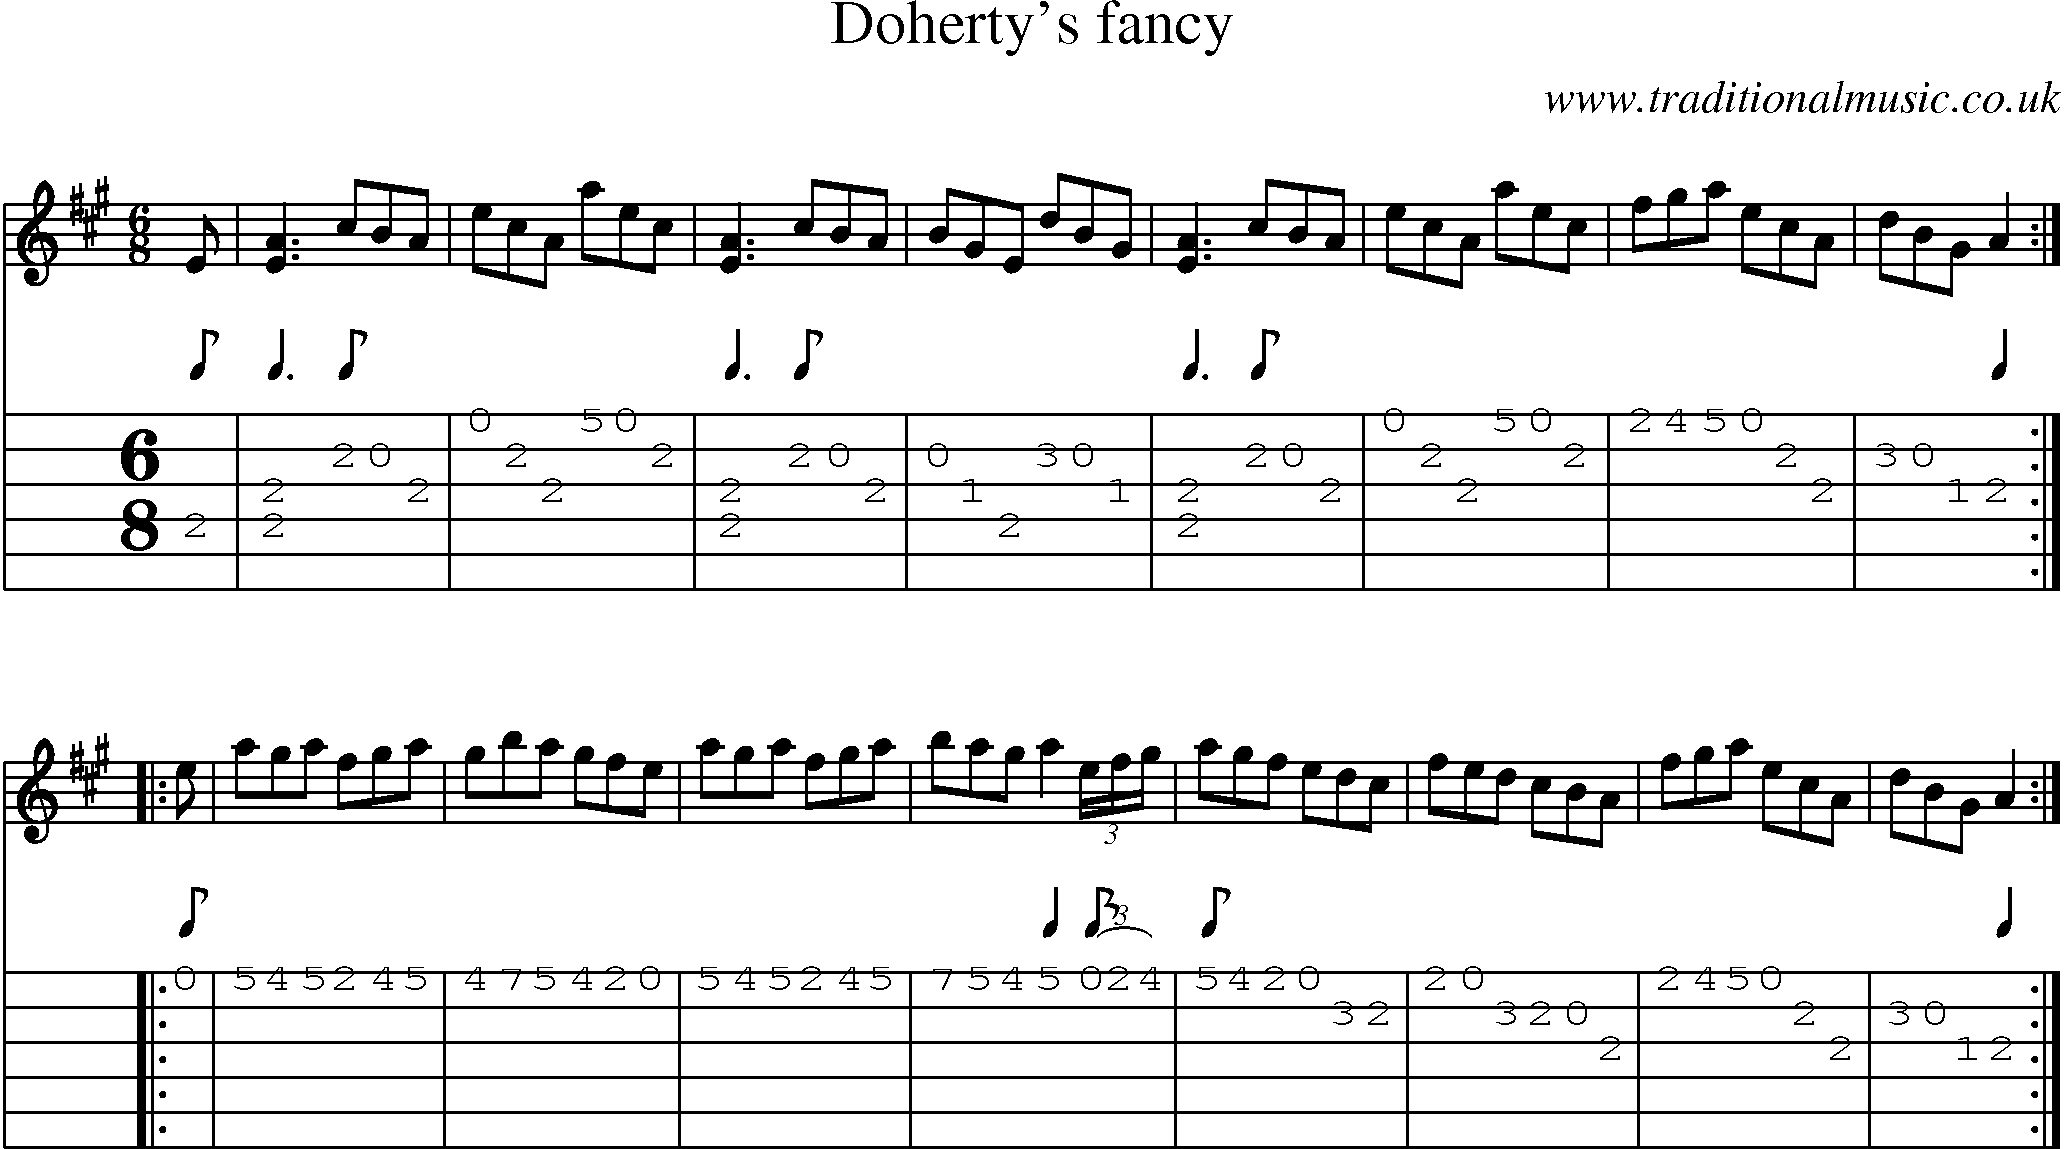 Music Score and Guitar Tabs for Dohertys Fancy